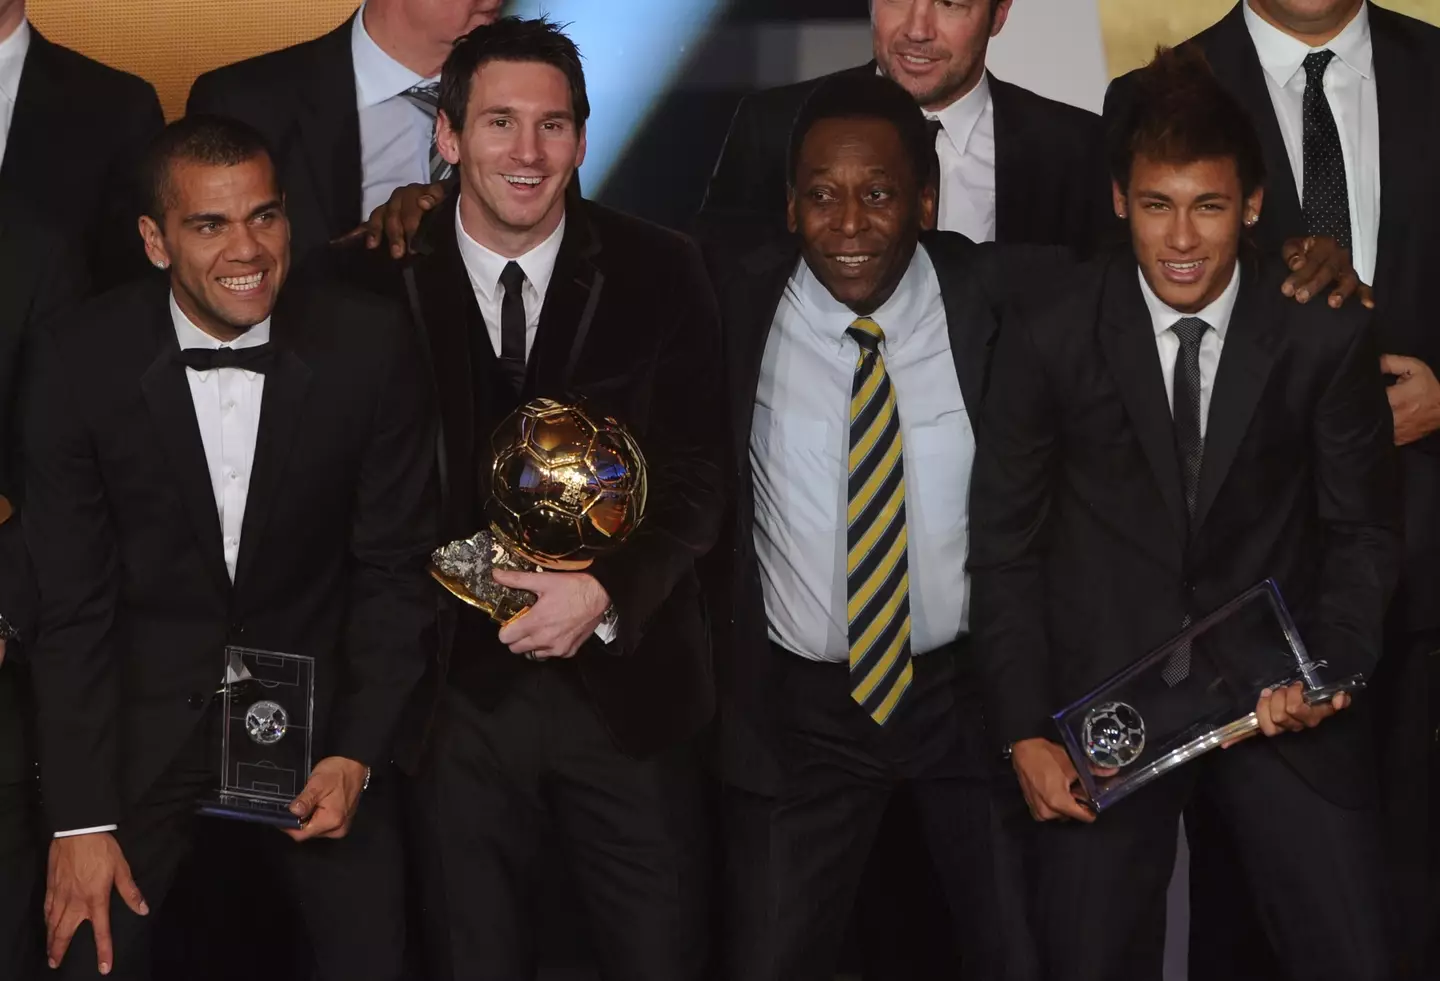 Neymar with Pele during the Ballon d'Or ceremony in 2012. Image: Getty 